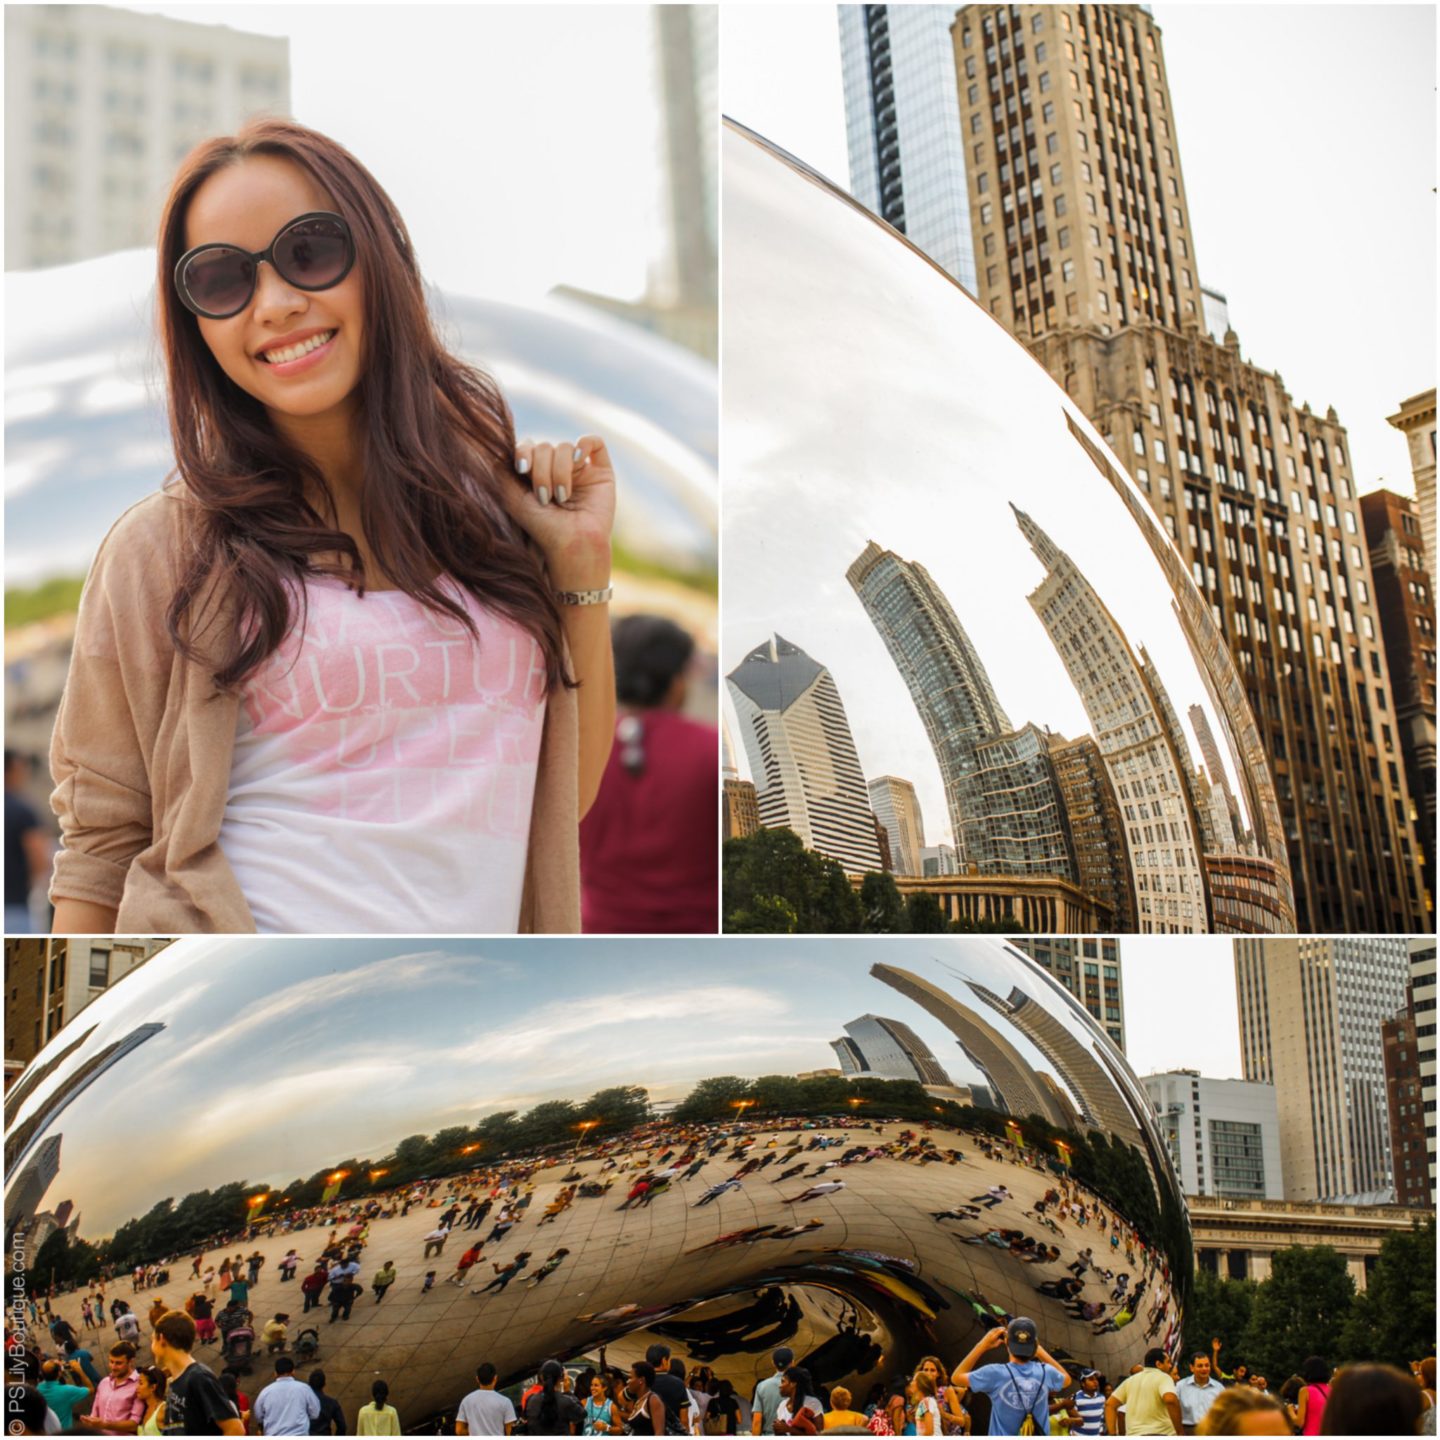 Instagram: @pslilyboutique-la-fashion-blogger-blog-white-and-pink-graphic-soft-aerie-american-eagle-tee-shirt-the-bean-millennium-park-chicago